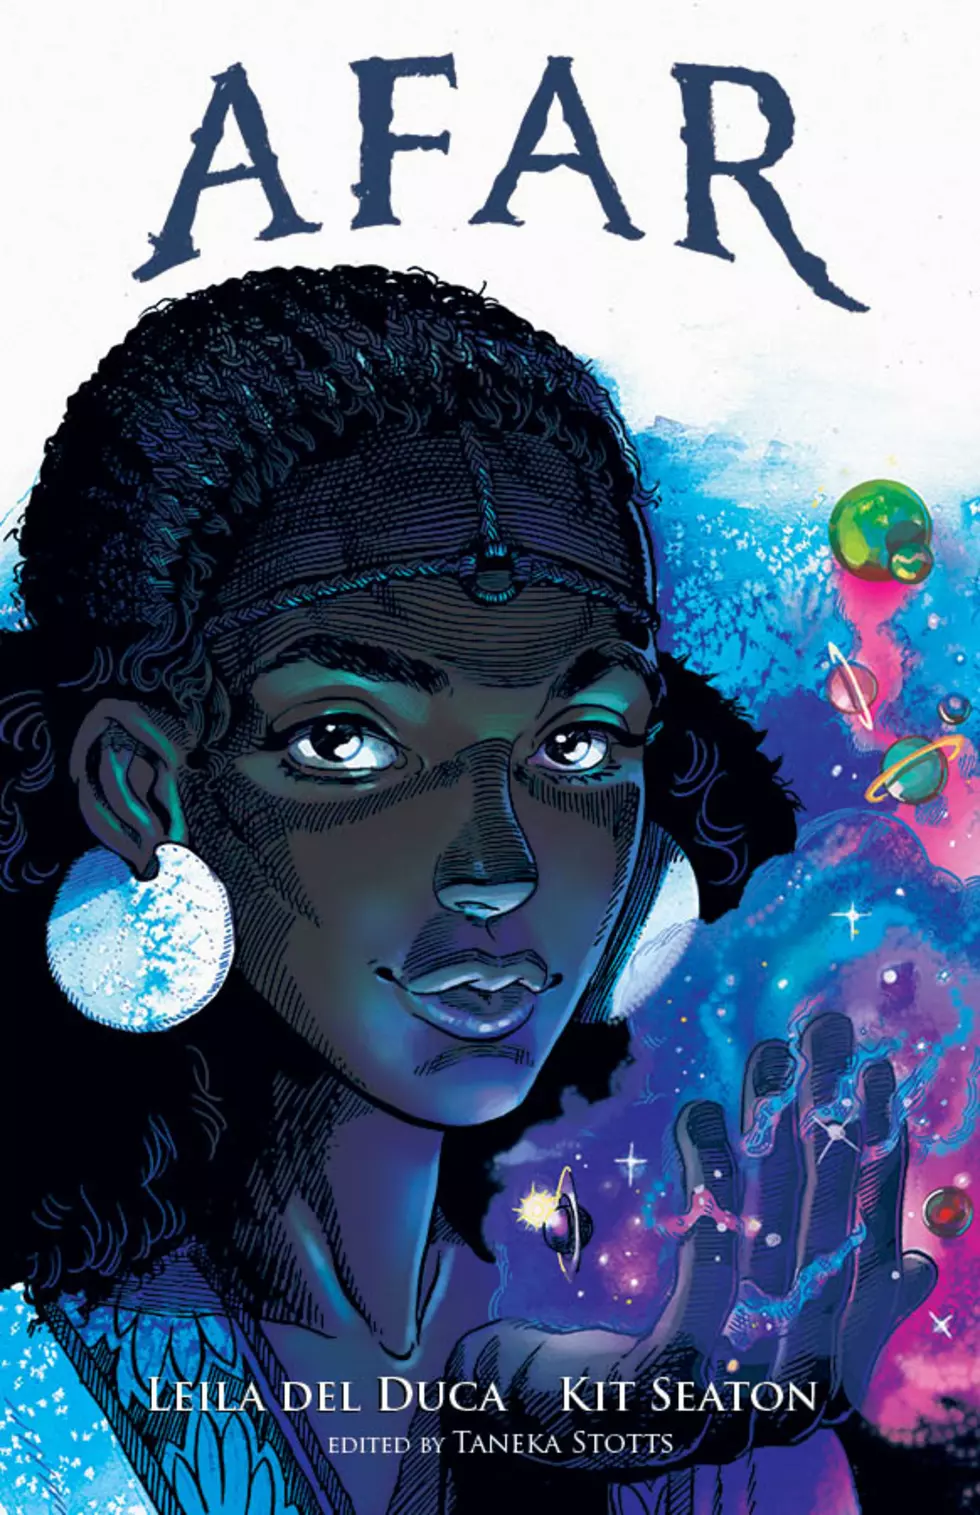 Tiger Troubles Abound In Leila Del Duca And Kit Seaton&#8217;s &#8216;Afar&#8217; This April [Exclusive Preview]